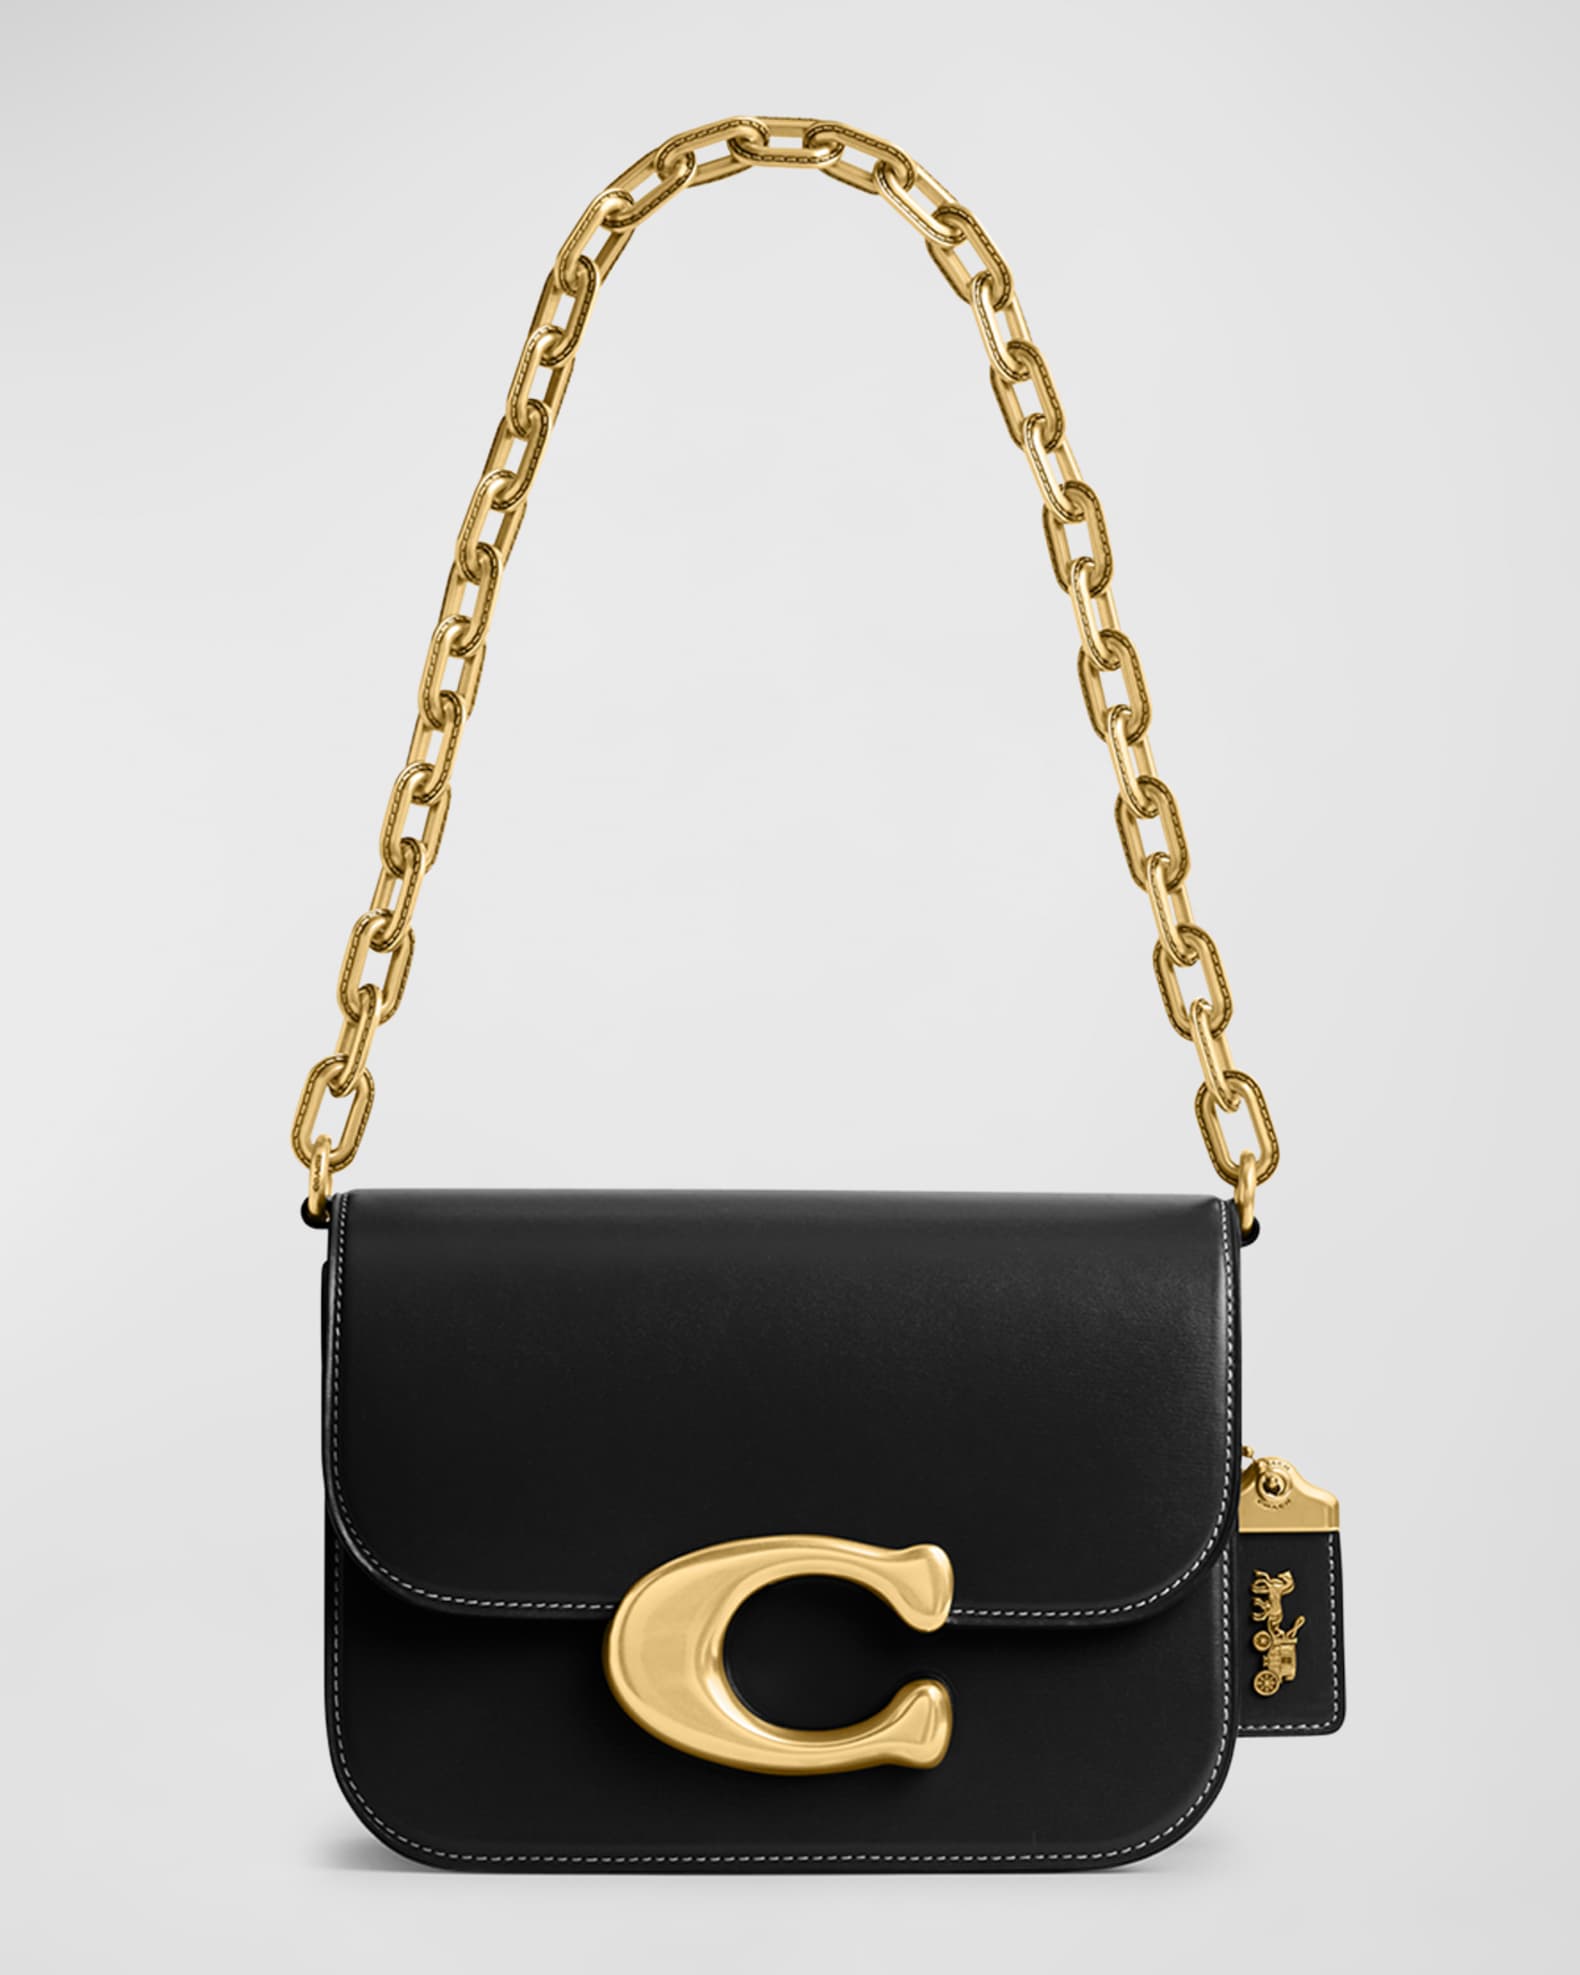 Chanel Heart Bag - Price, Launch Date & More - Luxe Front